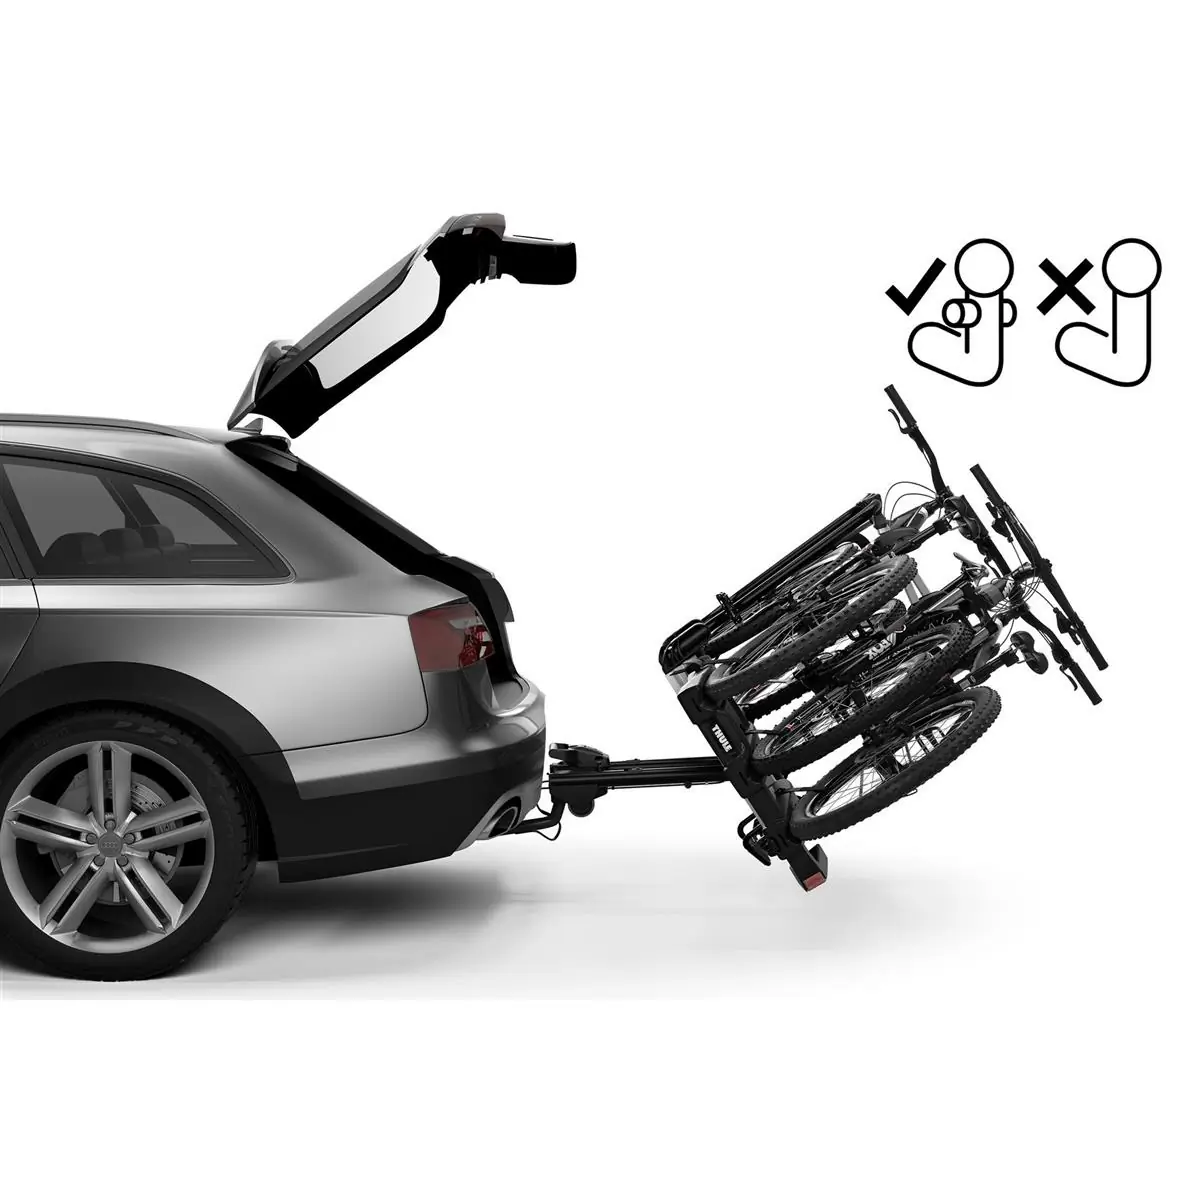 Tow Bar Bike Carrier EasyFold XT 966 Fix4Bike for Three Bikes only compatible with Fix4Bike #4